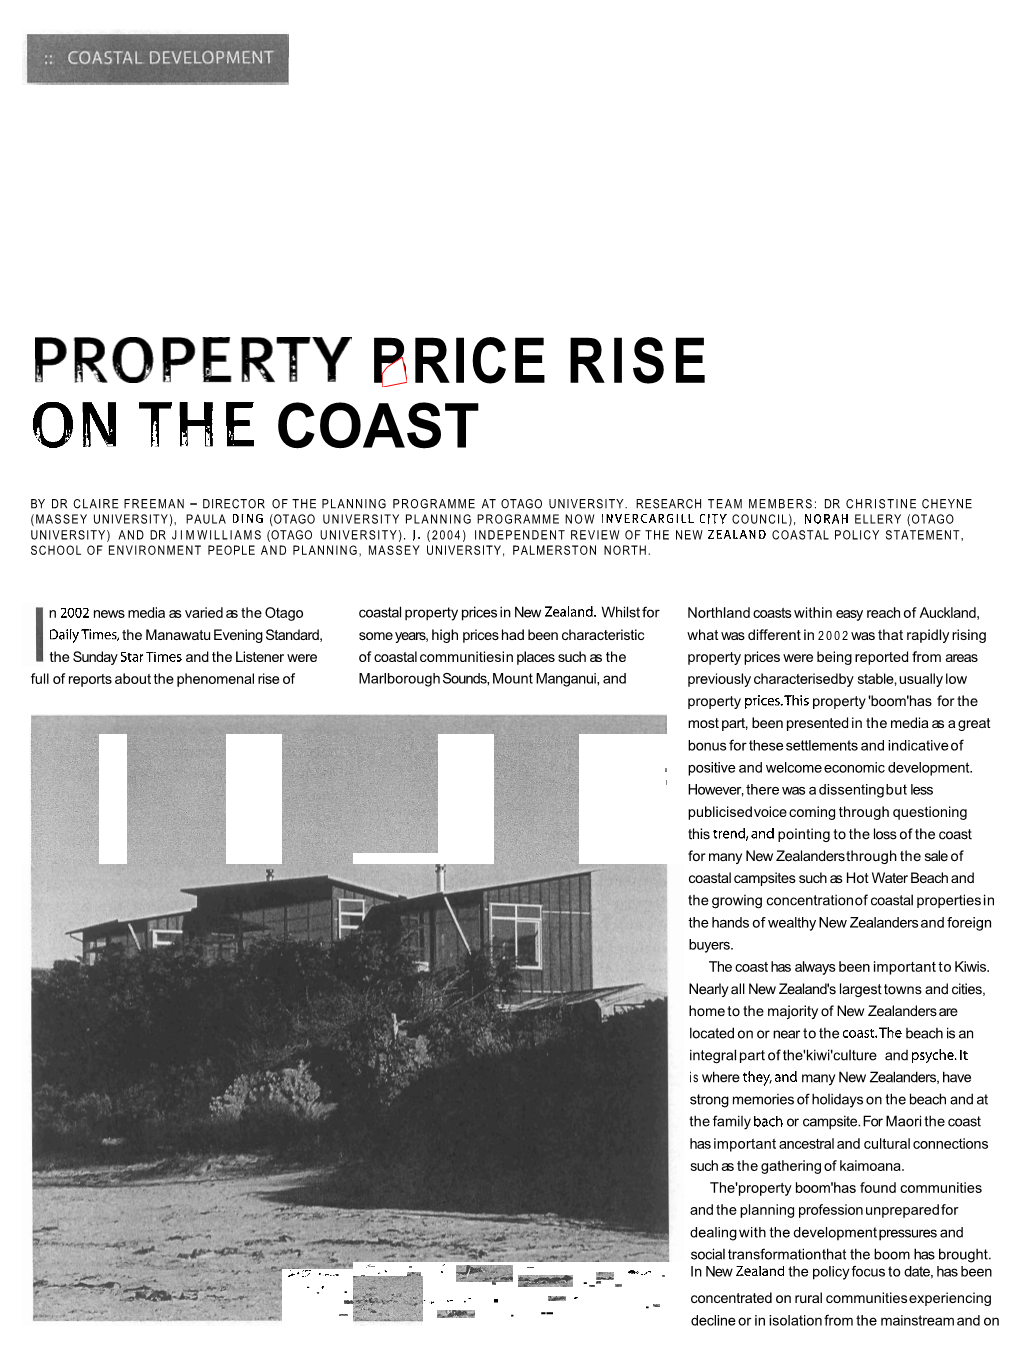 Property Price Rise on the Coast